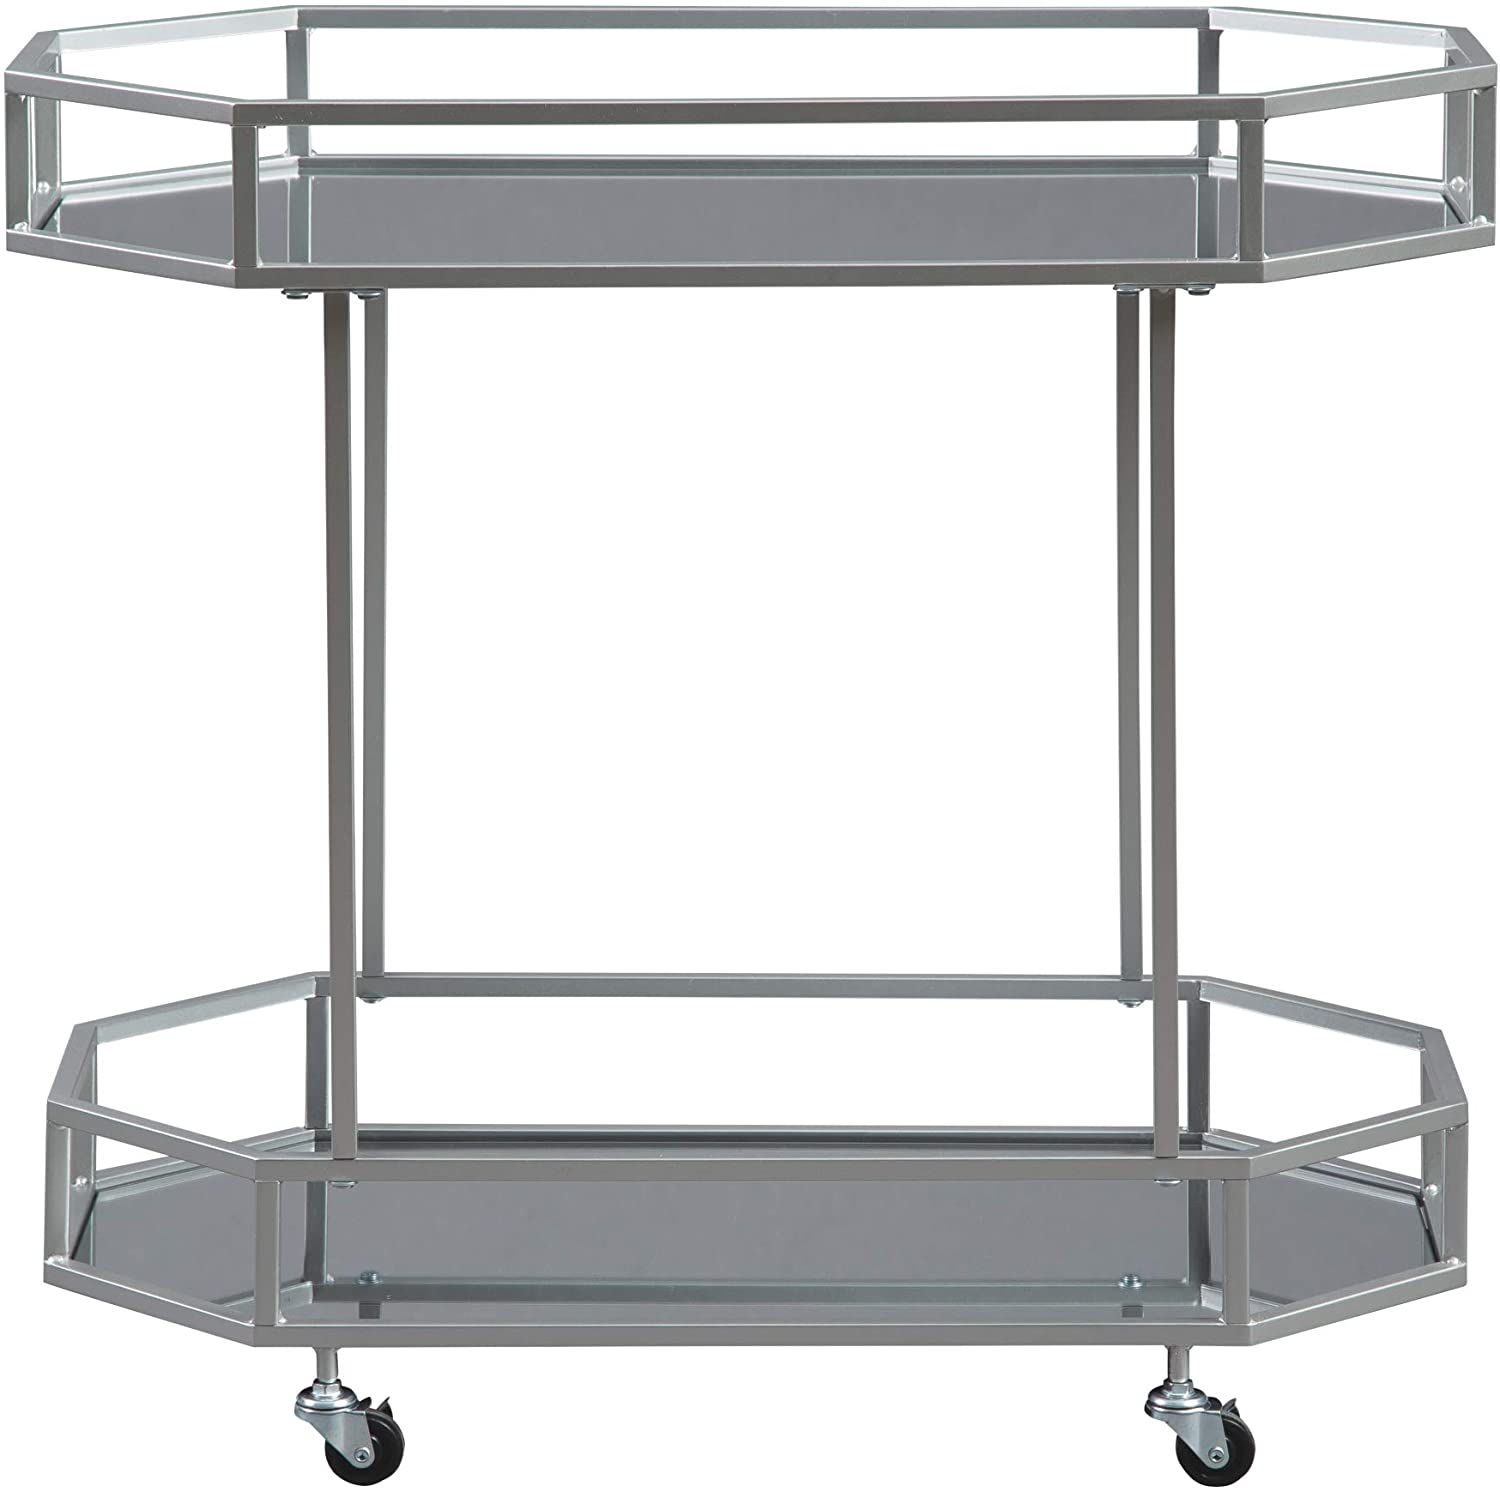 Bar Cabinet: Metal Bar Cart with Caster Wheels, Silver Finish 